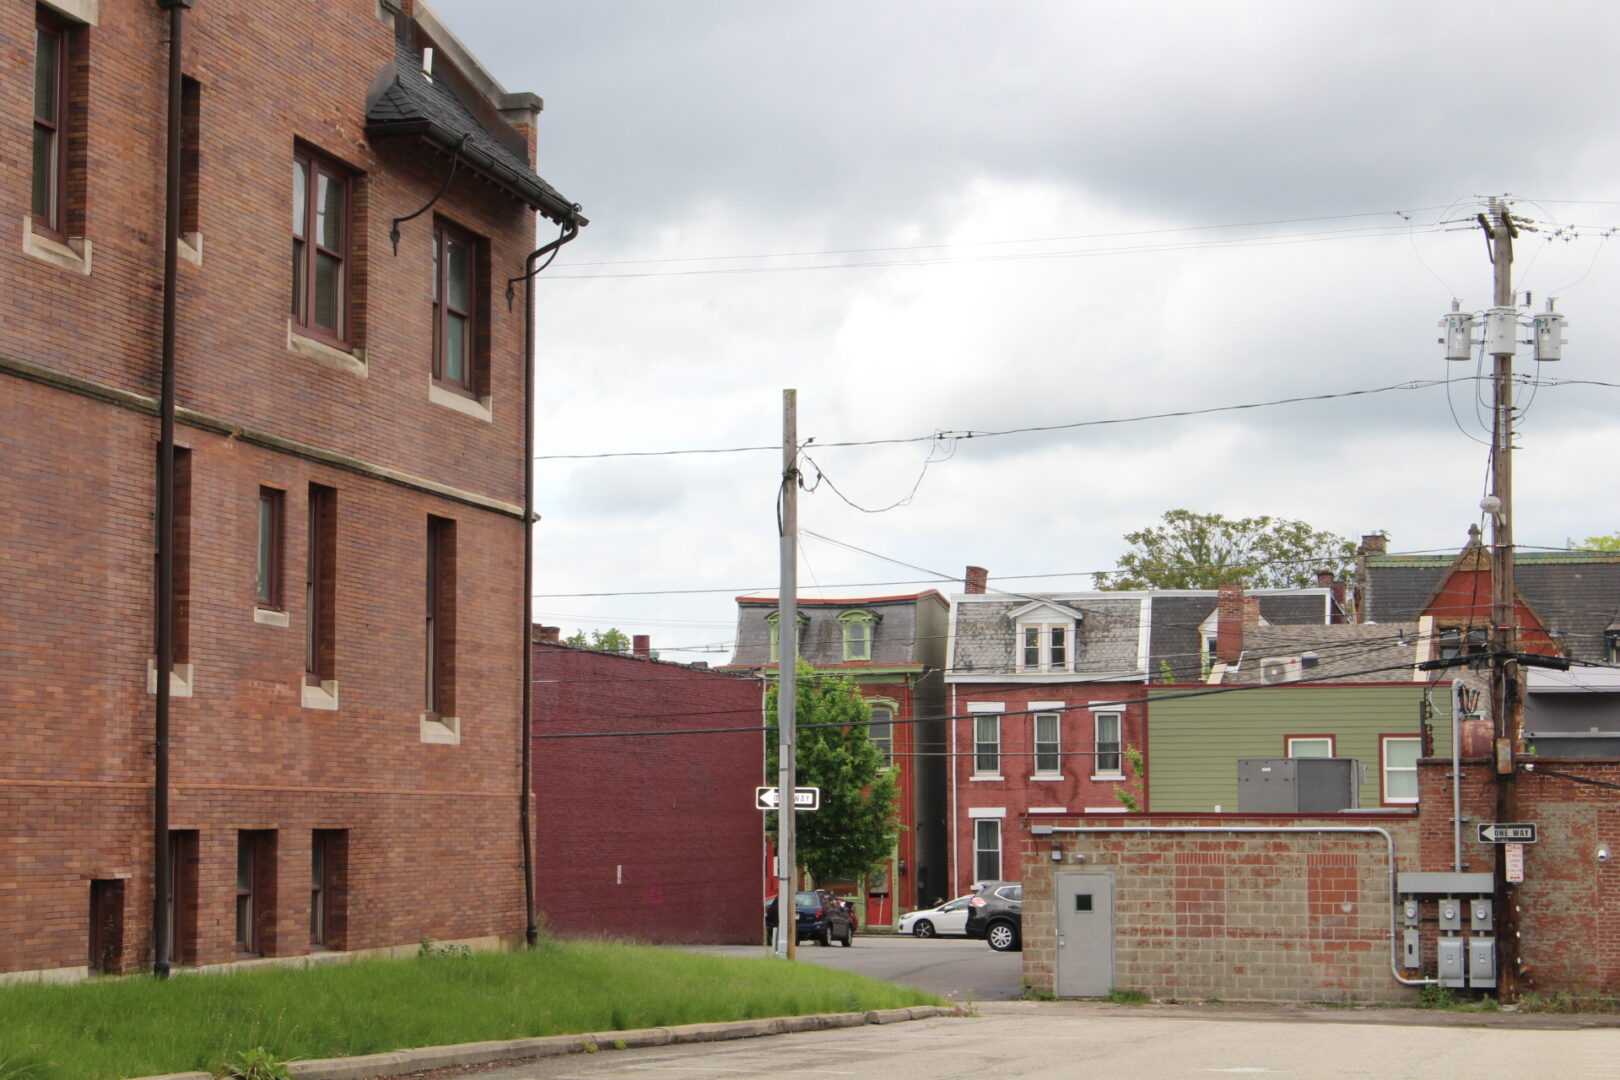 A street with brick buildings and a power pole.